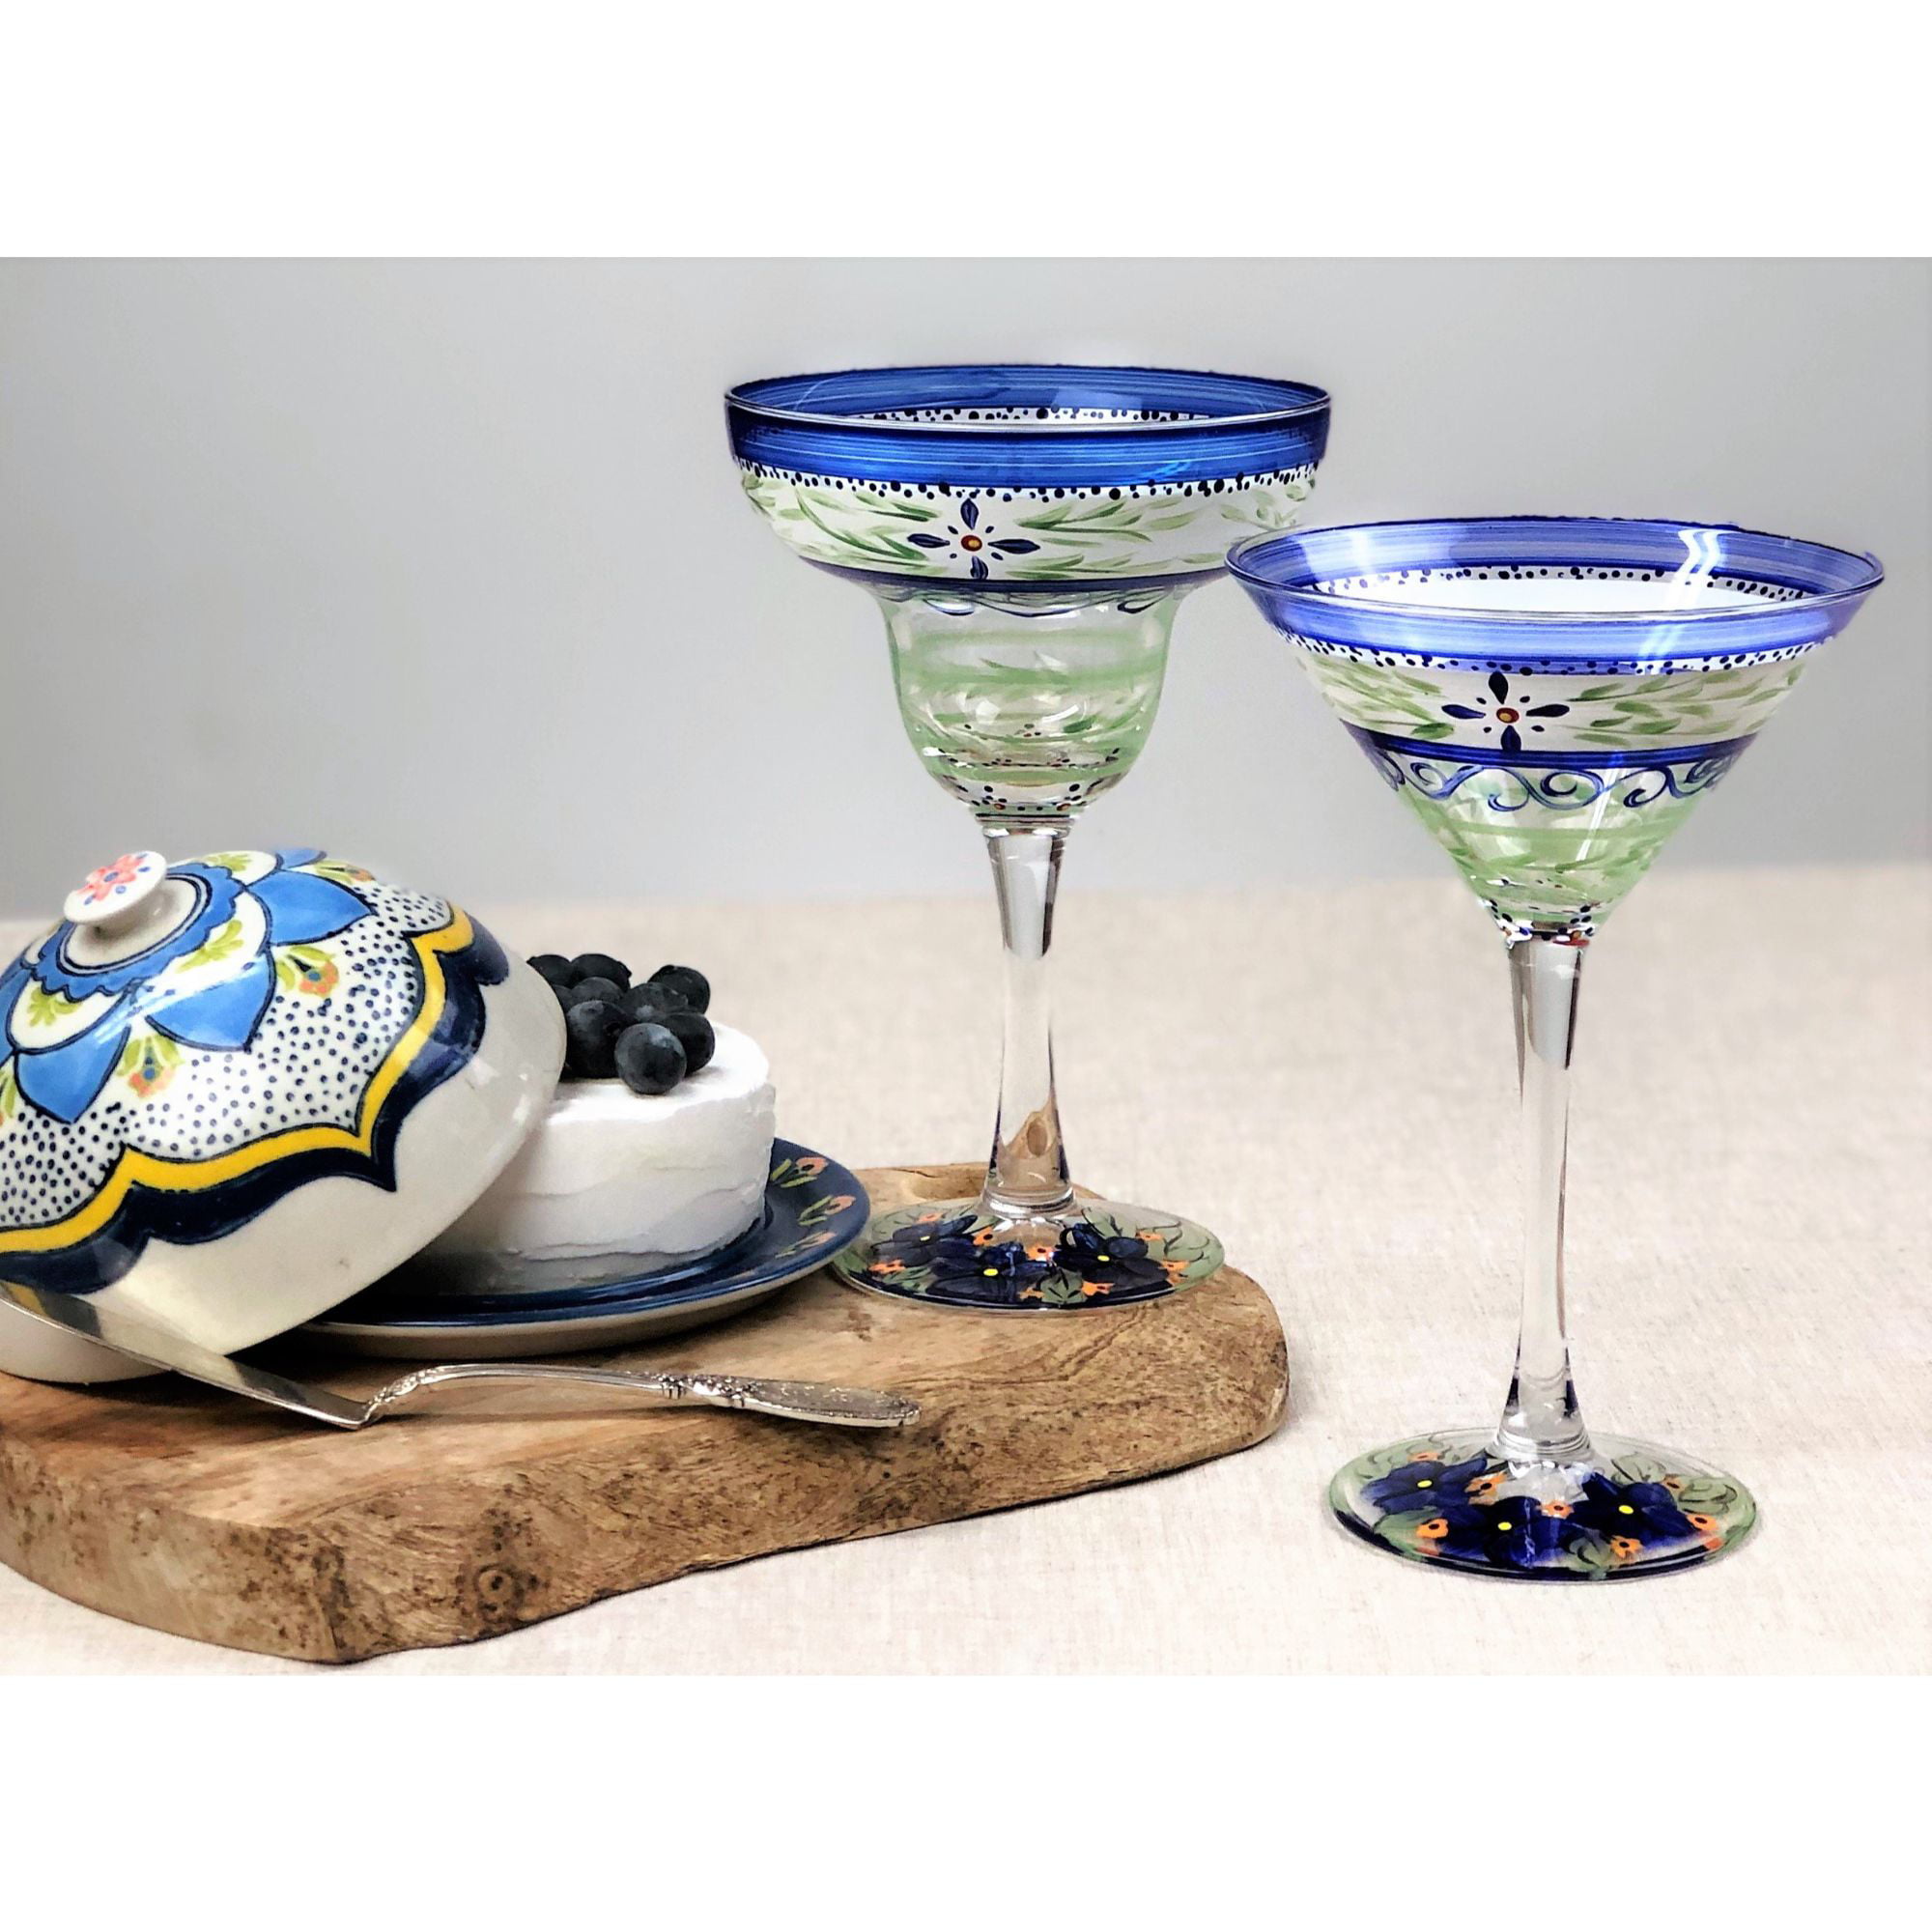 Hand painted fun Martini glasses with recipes on the bottom - set of 4